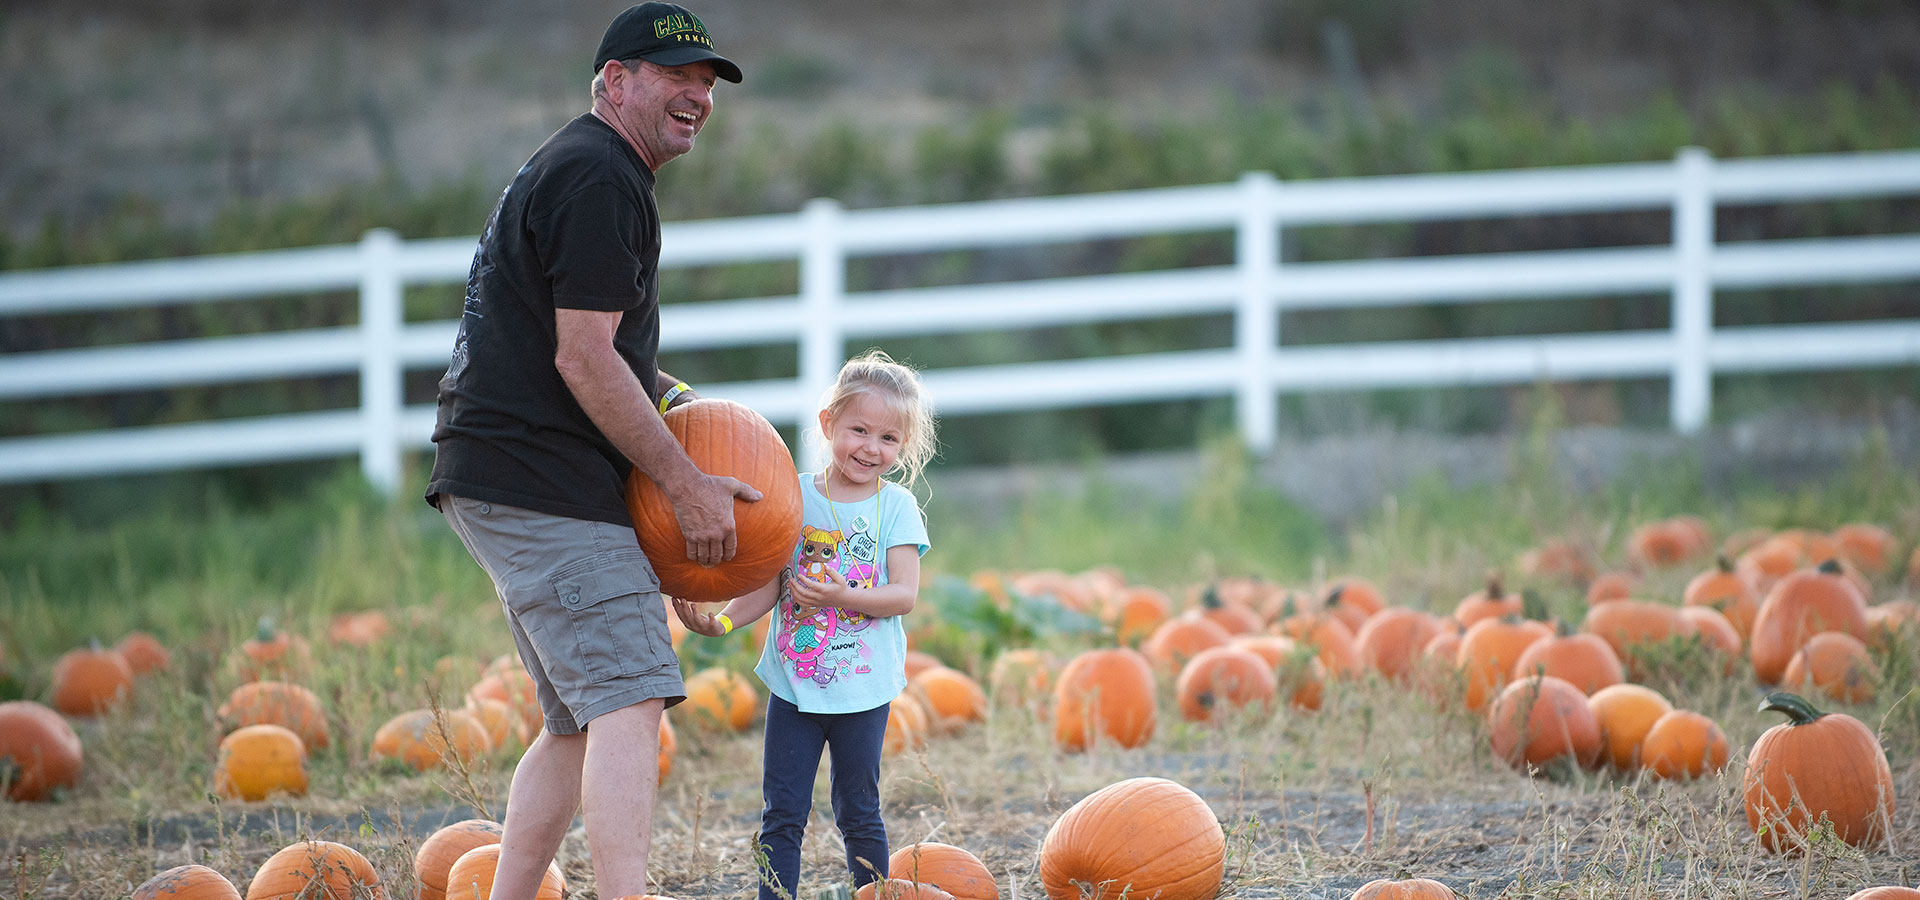 A father and daughter together at the pumpkin patch